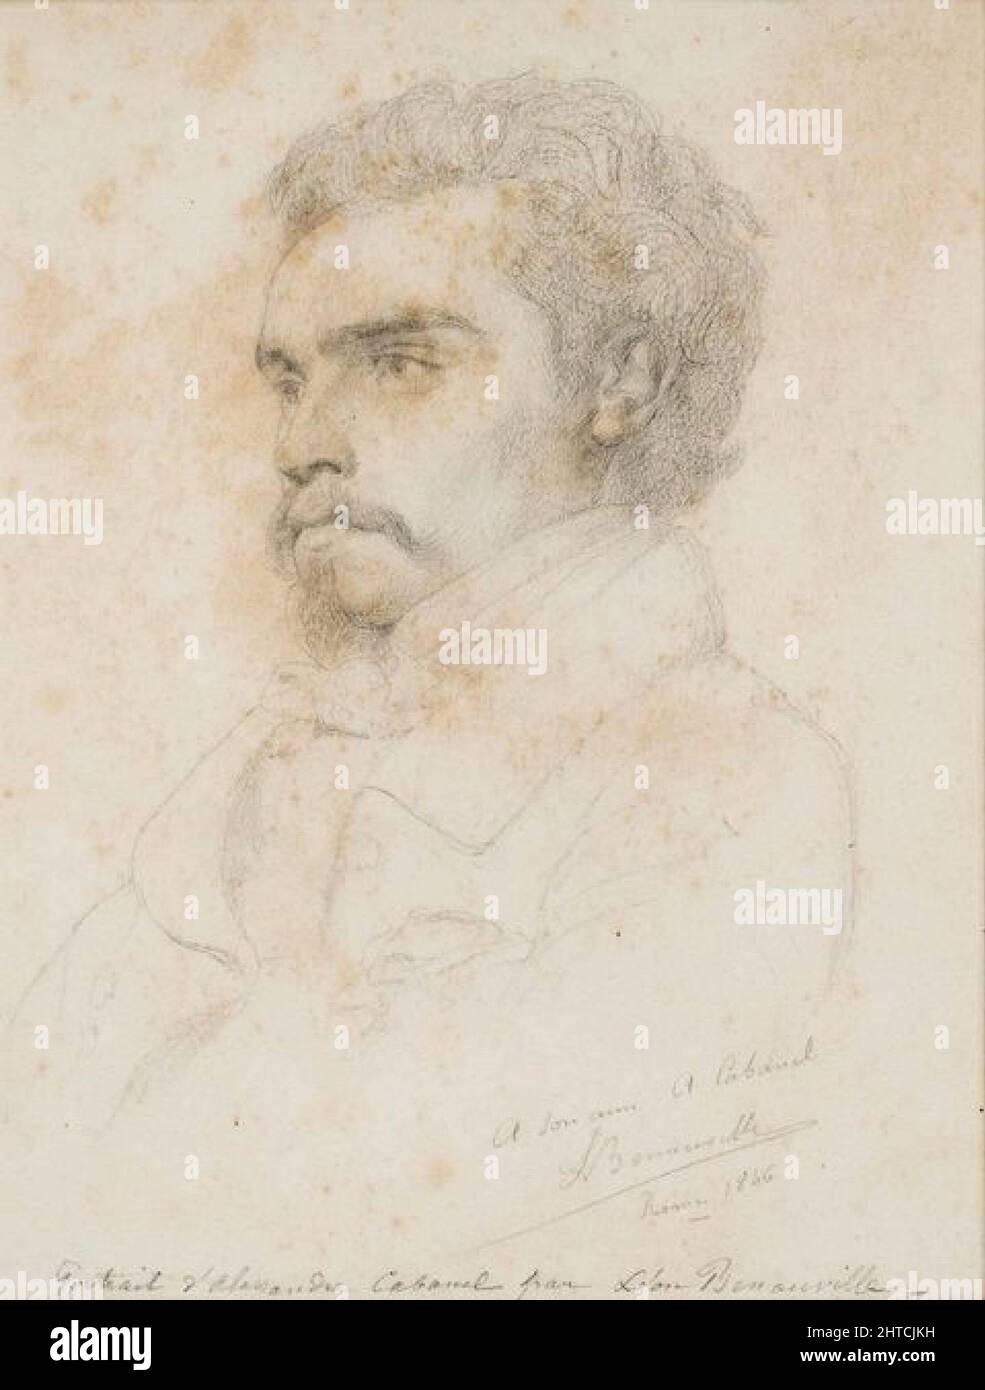 Portrait of the artist Alexandre Cabanel (1823-1889), 1846. Found in the Collection of the Mus&#xe9;e Fabre, Montpellier. Stock Photo